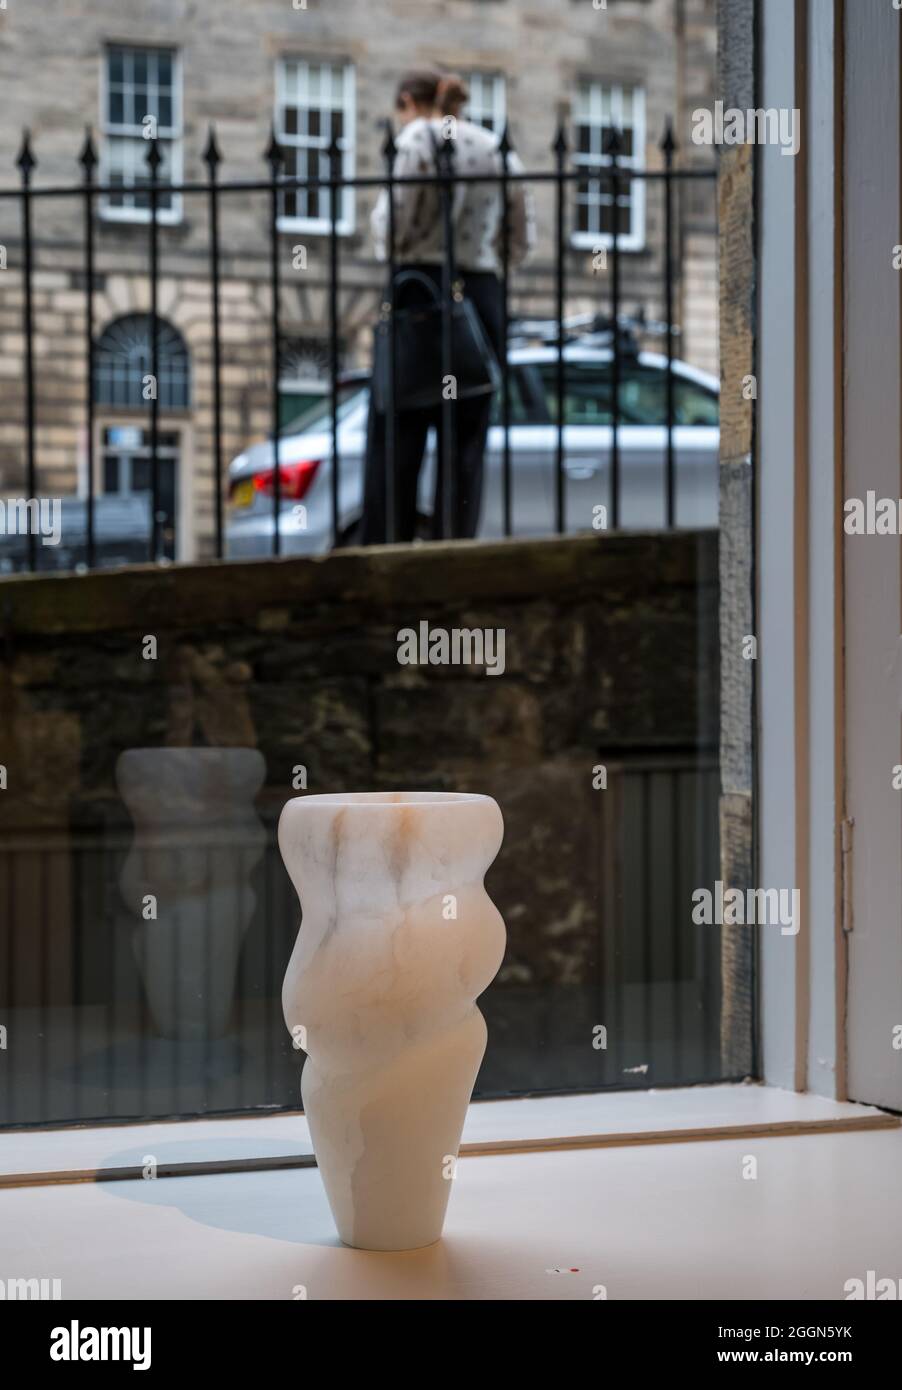 New exhibition at Scottish Gallery, Edinburgh, Scotland, United Kingdom, 02 September 2021. New exhibition at Scottish Gallery: An exhibition featuring alabaster sculptures by Oliver Cook opens today. This is Oliver Cook’s first solo exhibition title ‘Form and Light’. Pictured: an alabaster artwork by Oliver Cook Stock Photo